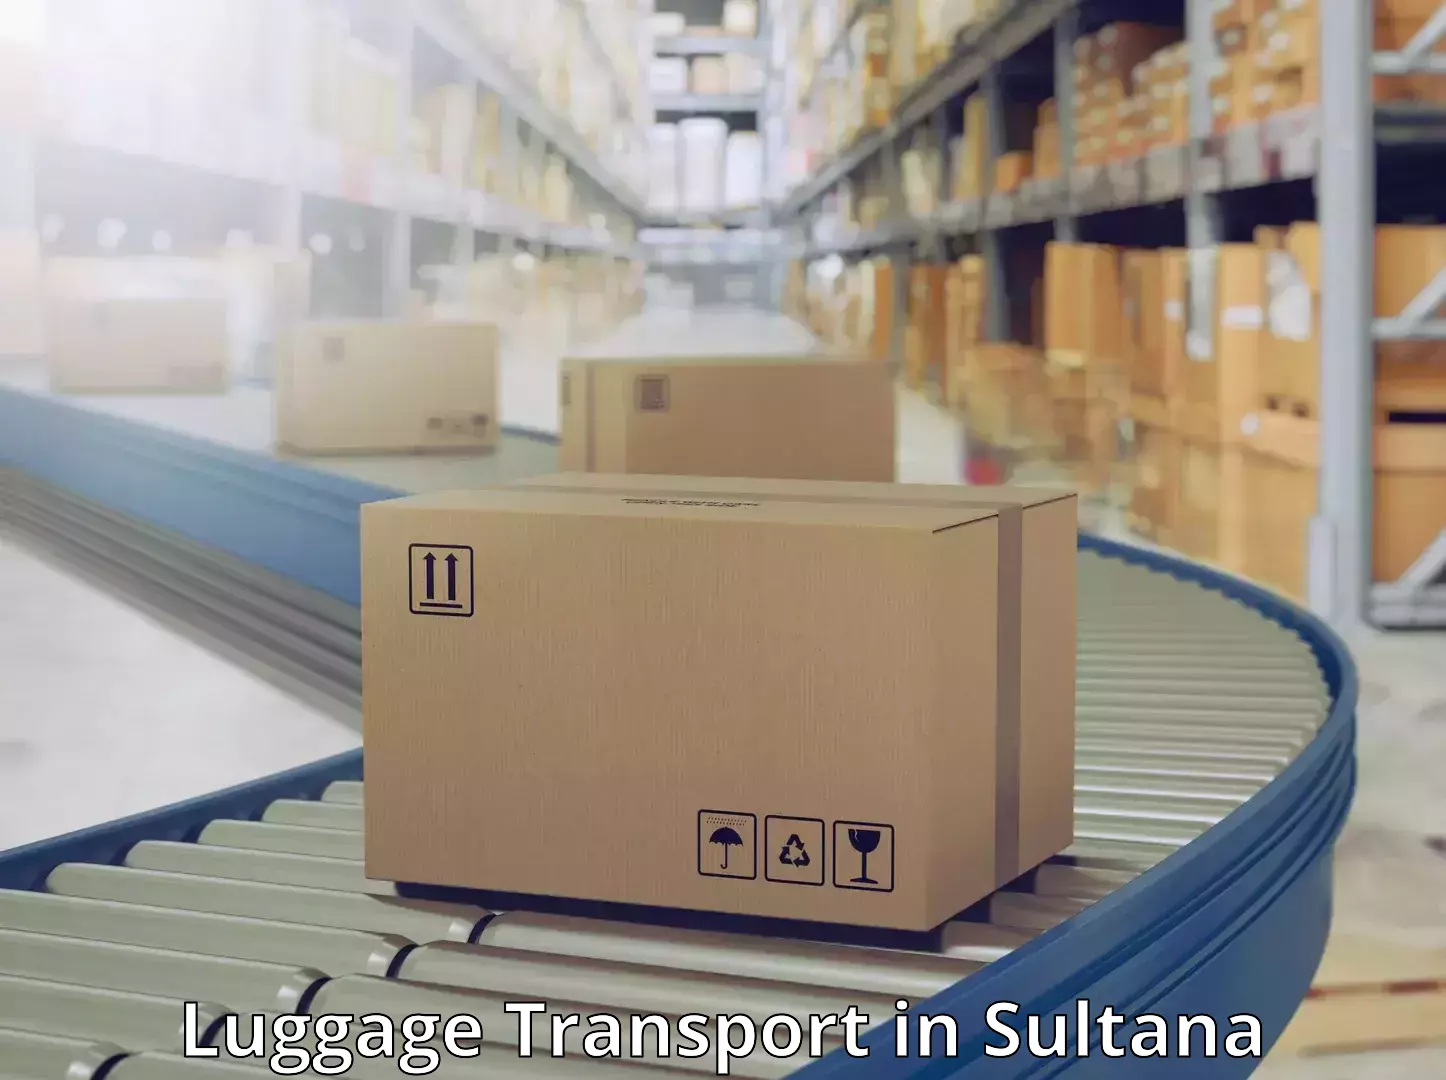 Instant baggage transport quote in Sultana